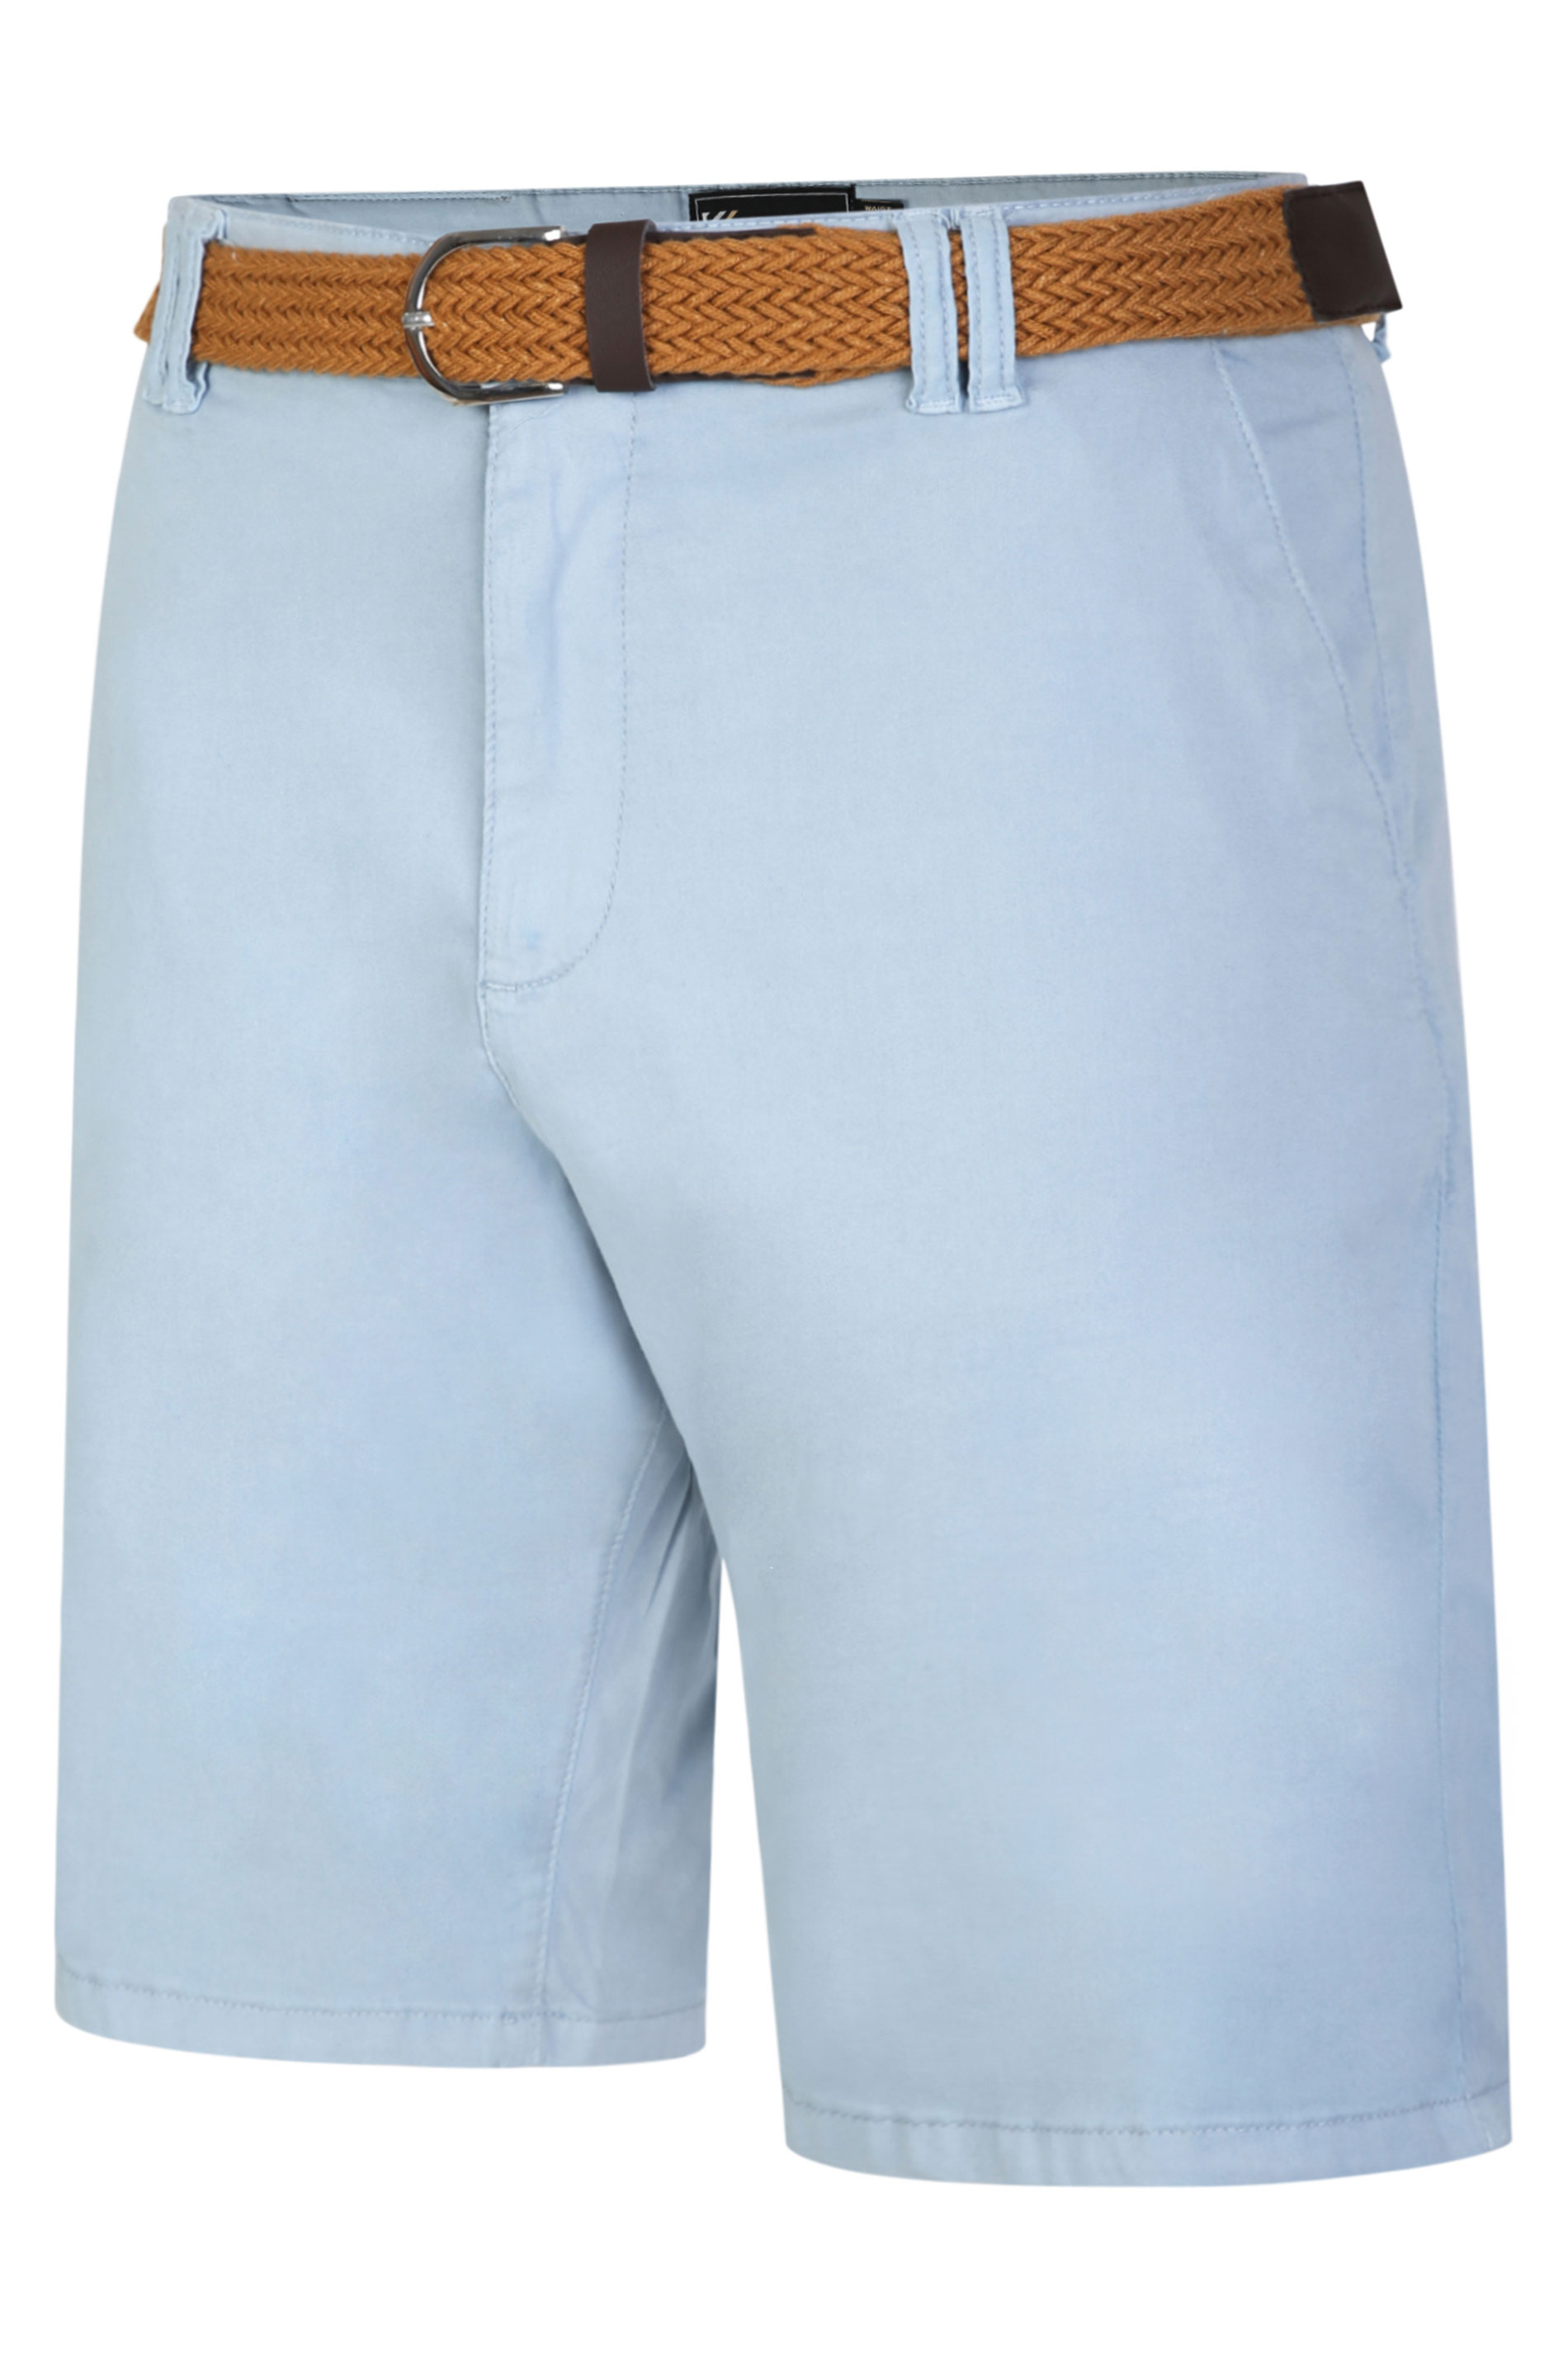 KAM Big & Tall Blue Belted Oxford Shorts 1